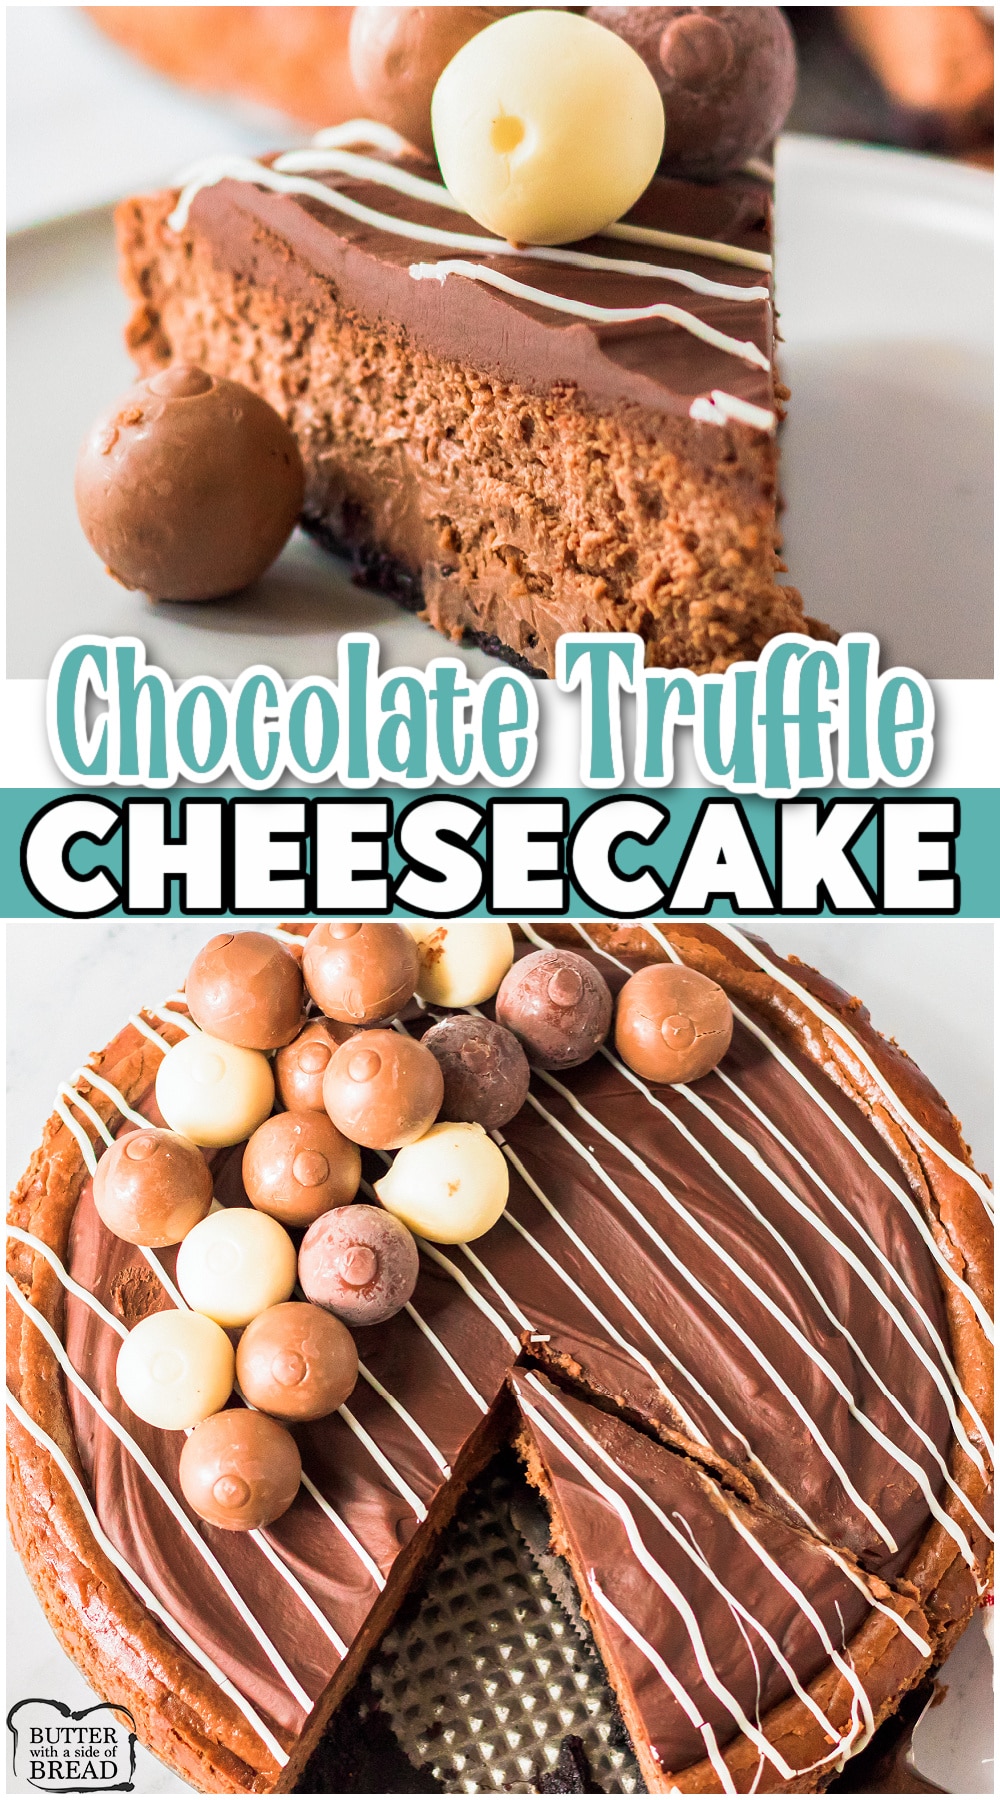 Chocolate Truffle Cheesecake made with classic cheesecake ingredients, baked, then topped with a decadent chocolate ganache and Lindt truffles! Indulgent homemade chocolate cheesecake recipe that everyone enjoys! 